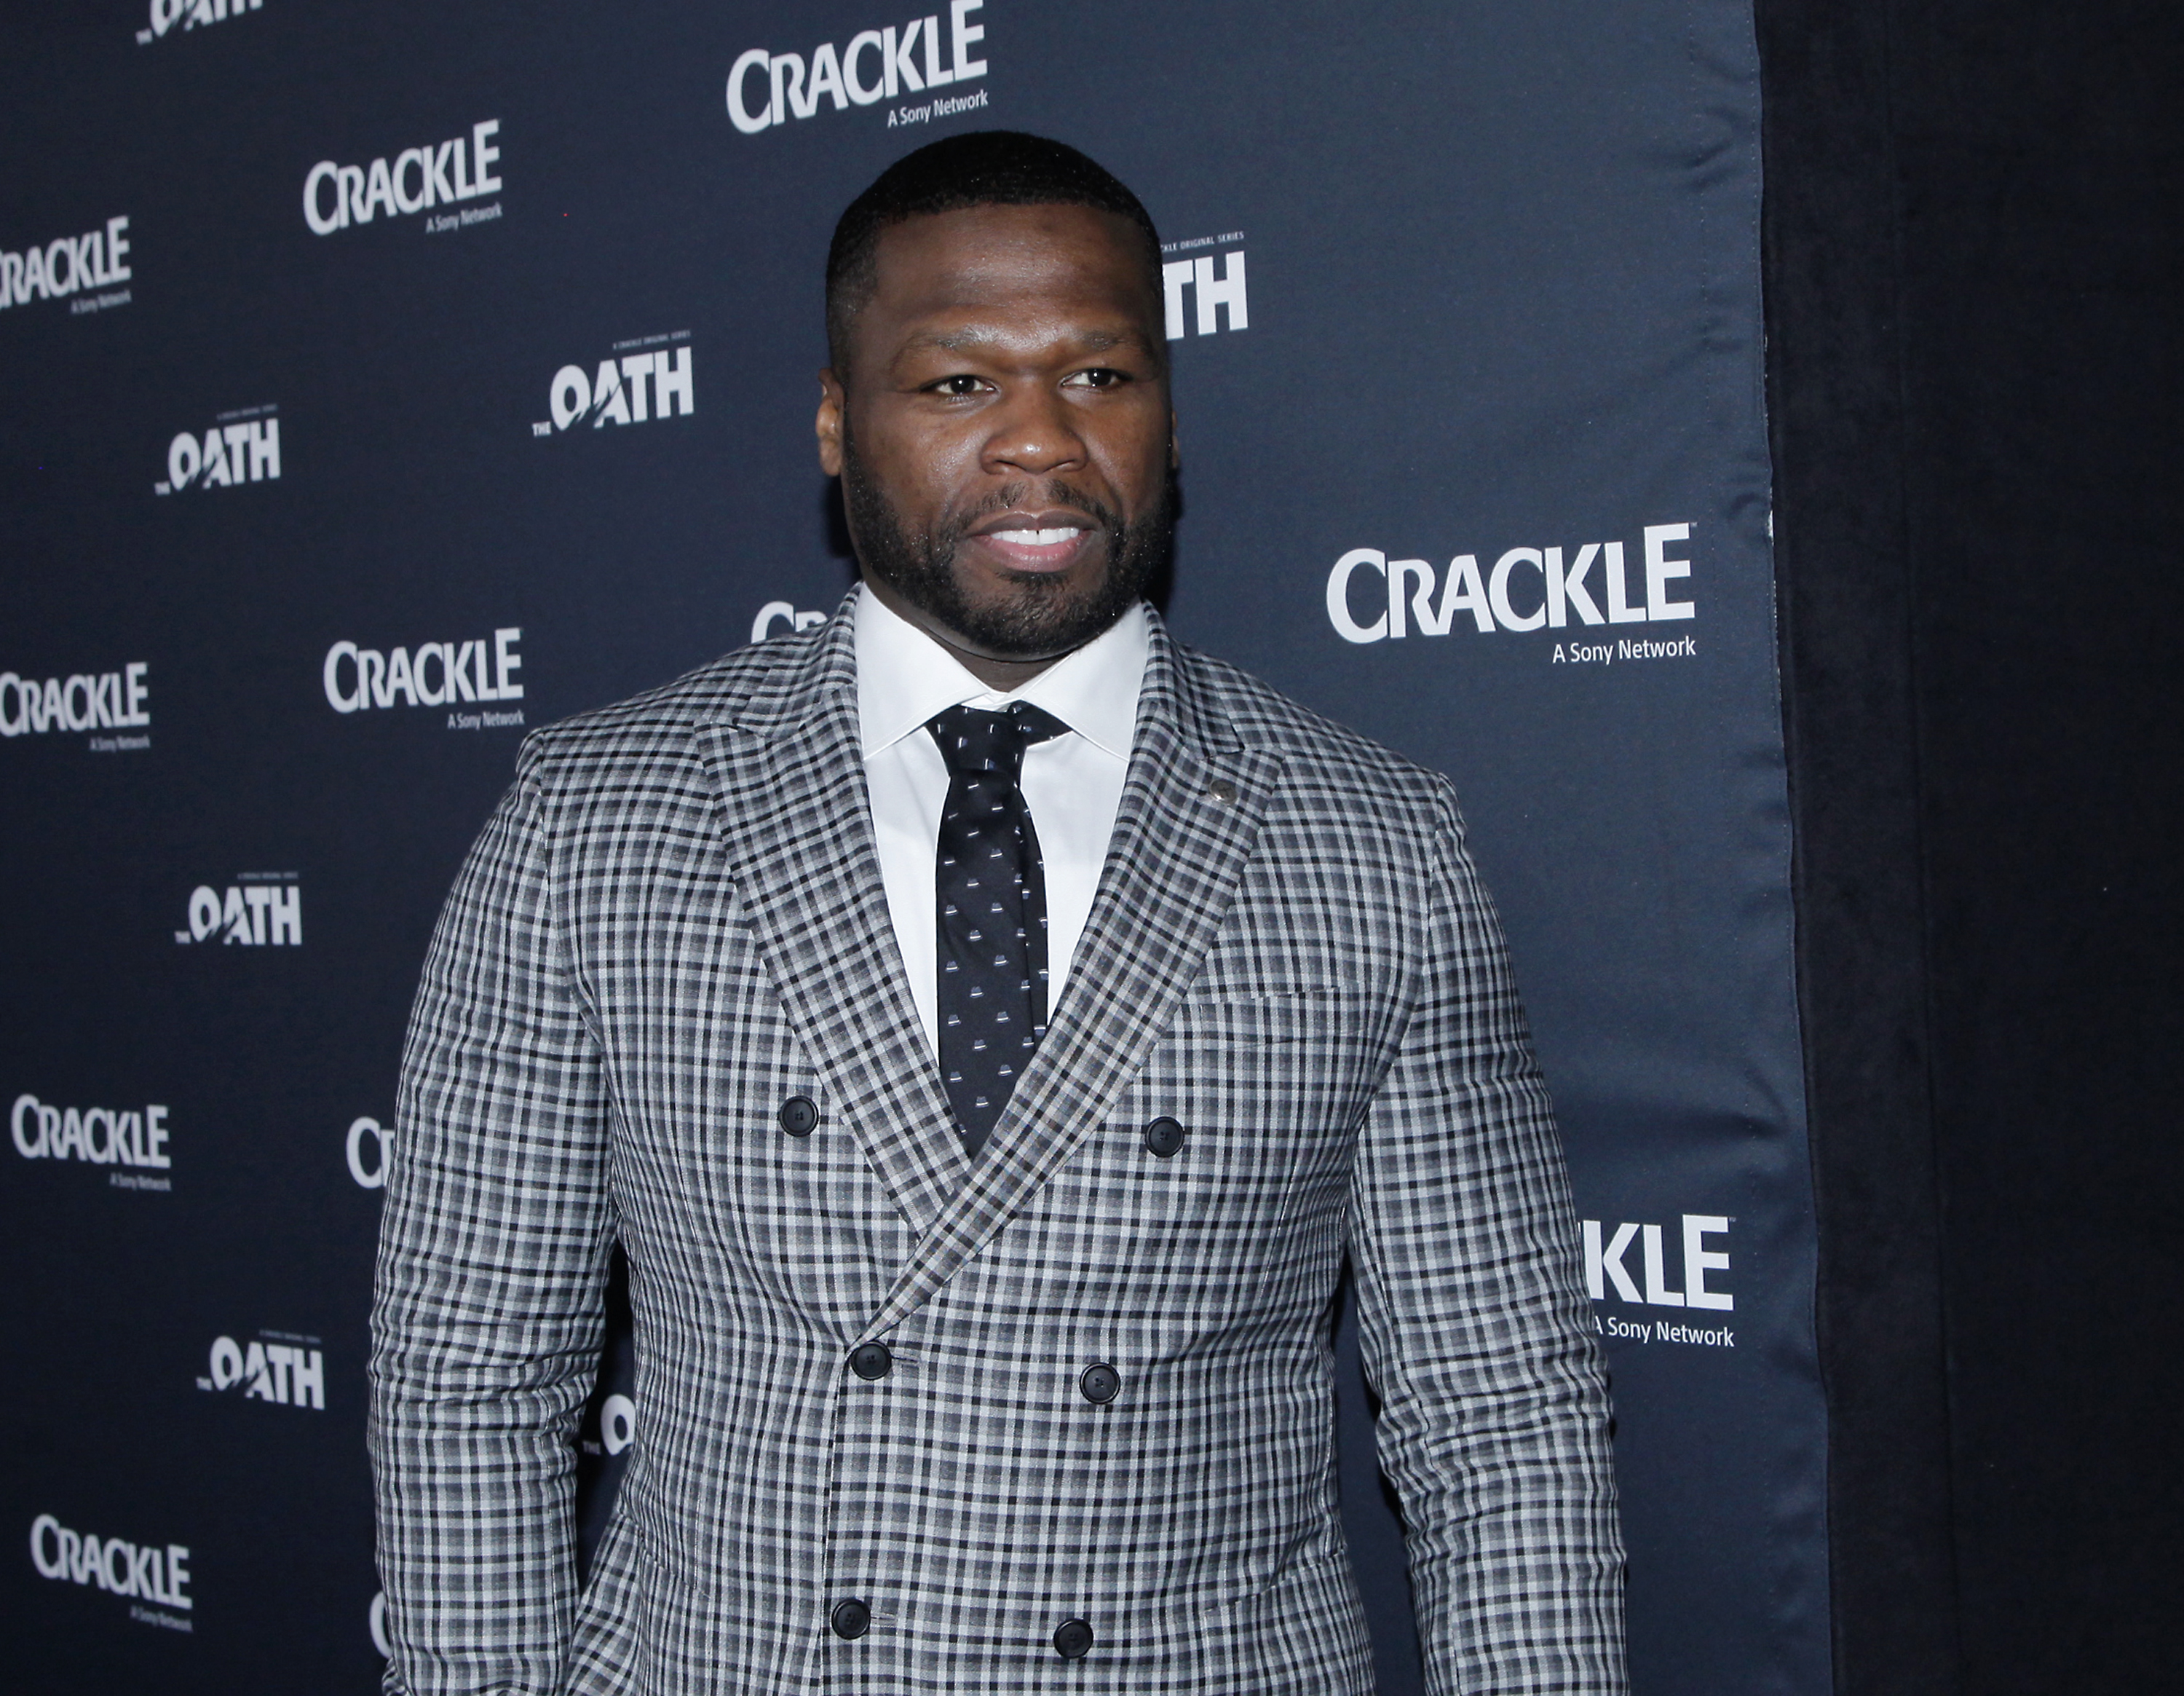 50 Cent at the premiere of Crackle's "The Oath" on March 7, 2018, in Culver City, California. | Source: Getty Images